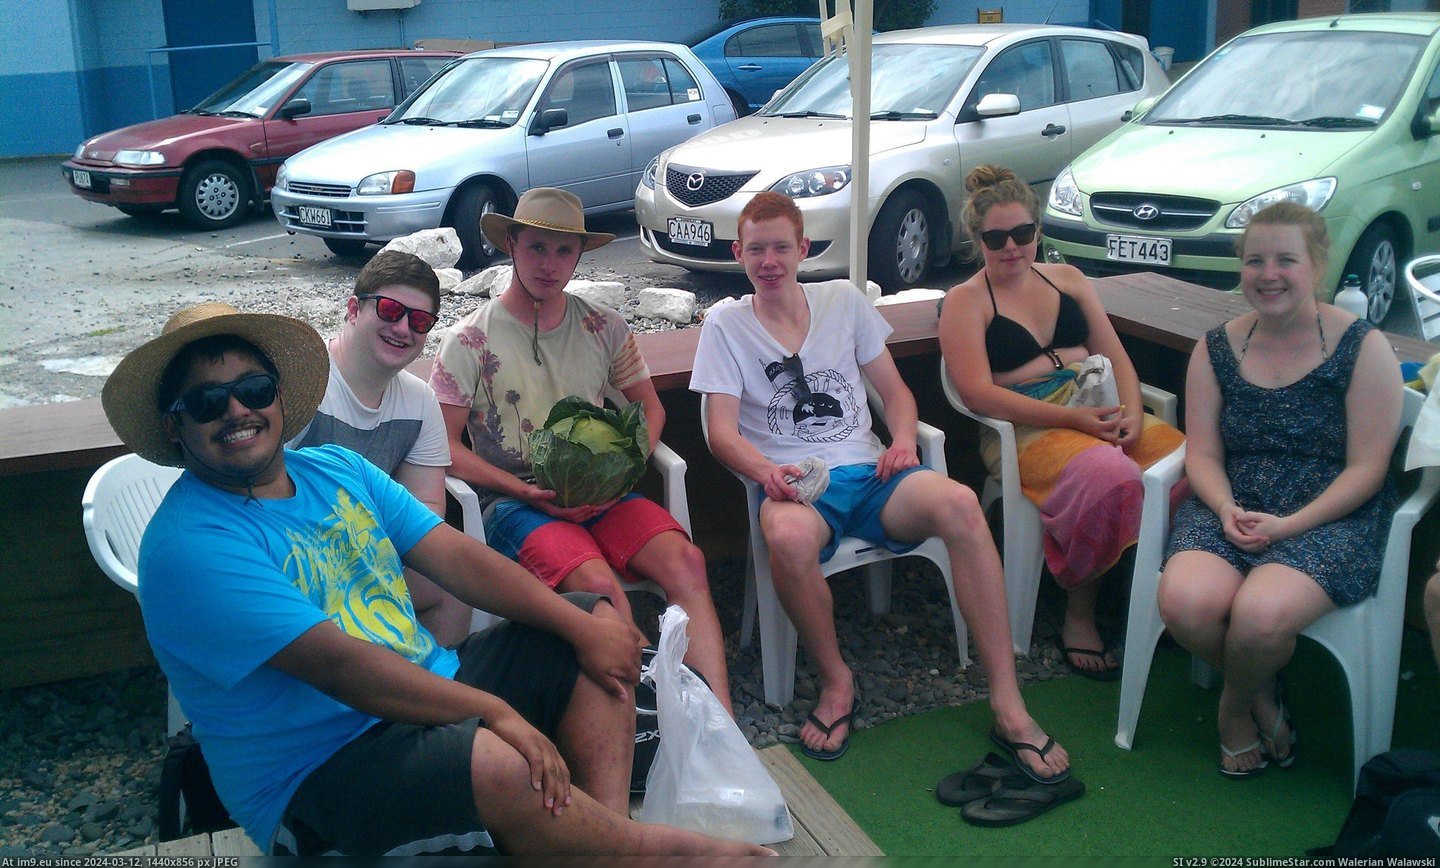 #Beach #Fun #Friends #Mad #Cabbage #Had #Wanted #Bought [Pics] None of my friends wanted to go to the beach with me so I bought a cabbage and had even more fun without them. I also mad Pic. (Изображение из альбом My r/PICS favs))